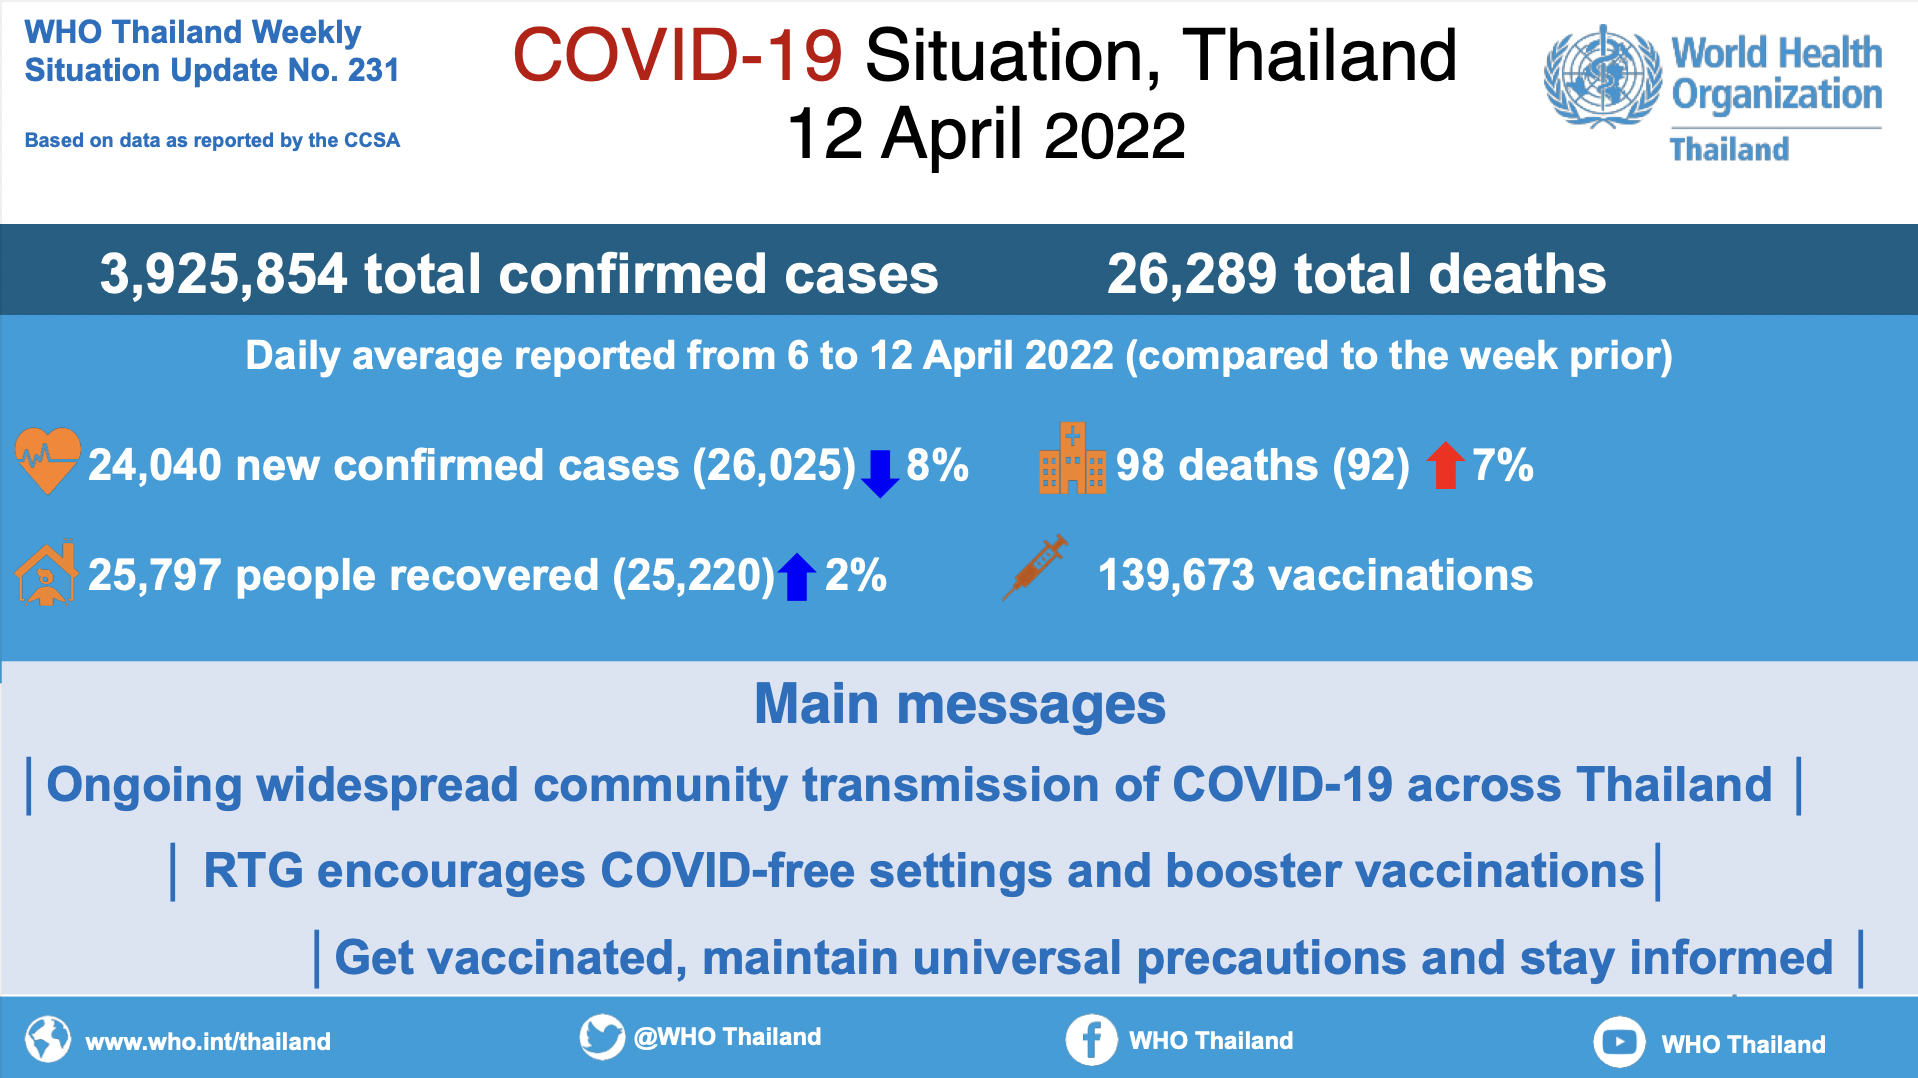 COVID-19 Weekly Situation Update (12 April 2022) No. 231